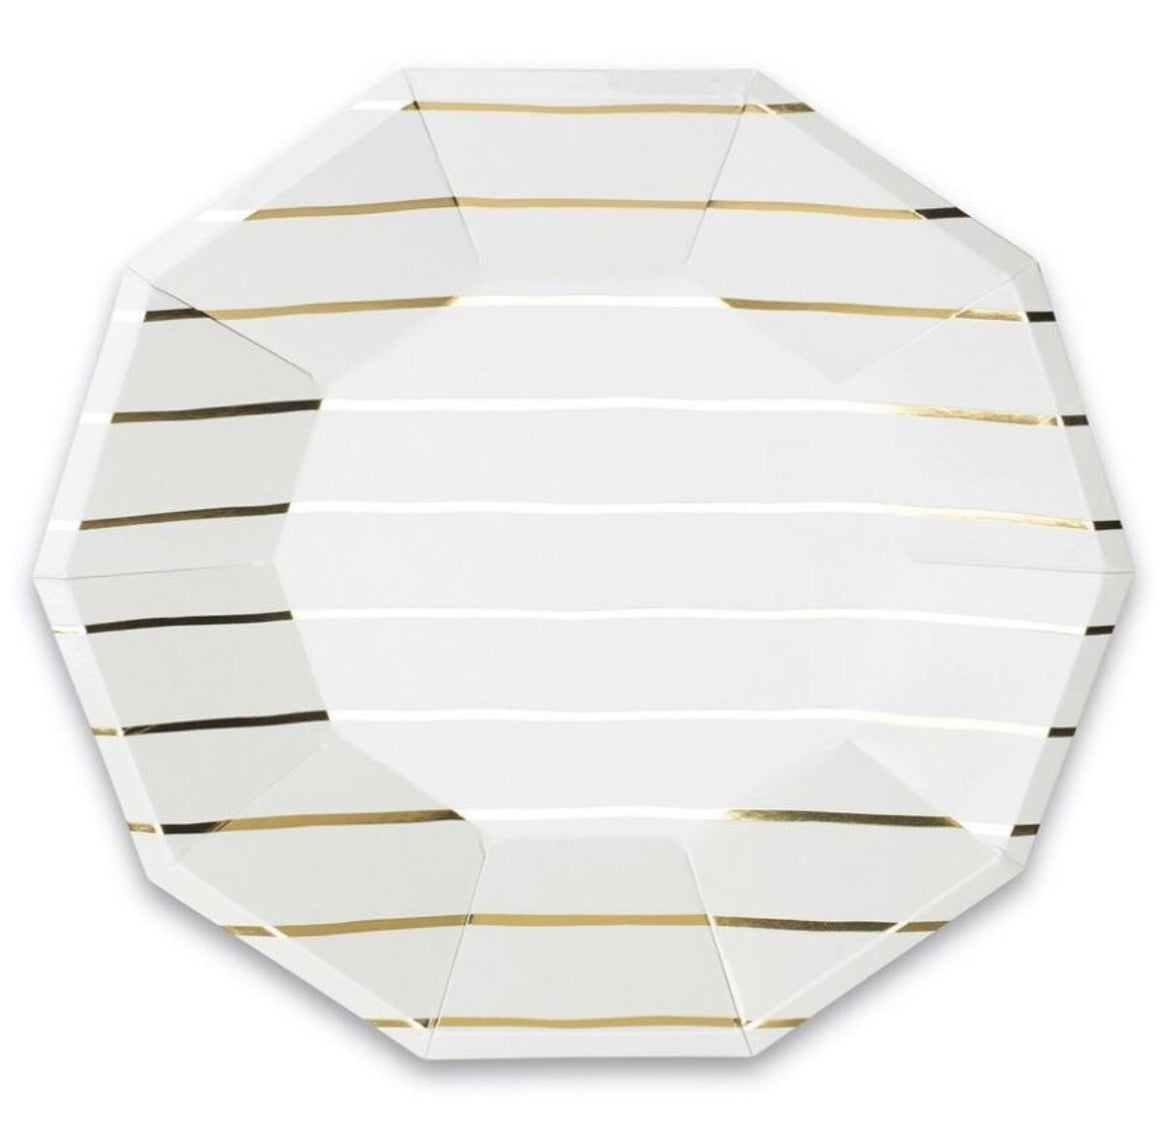 PLATES LARGE - GOLD DAYDREAM SOCIETY FRENCHIE STRIPES